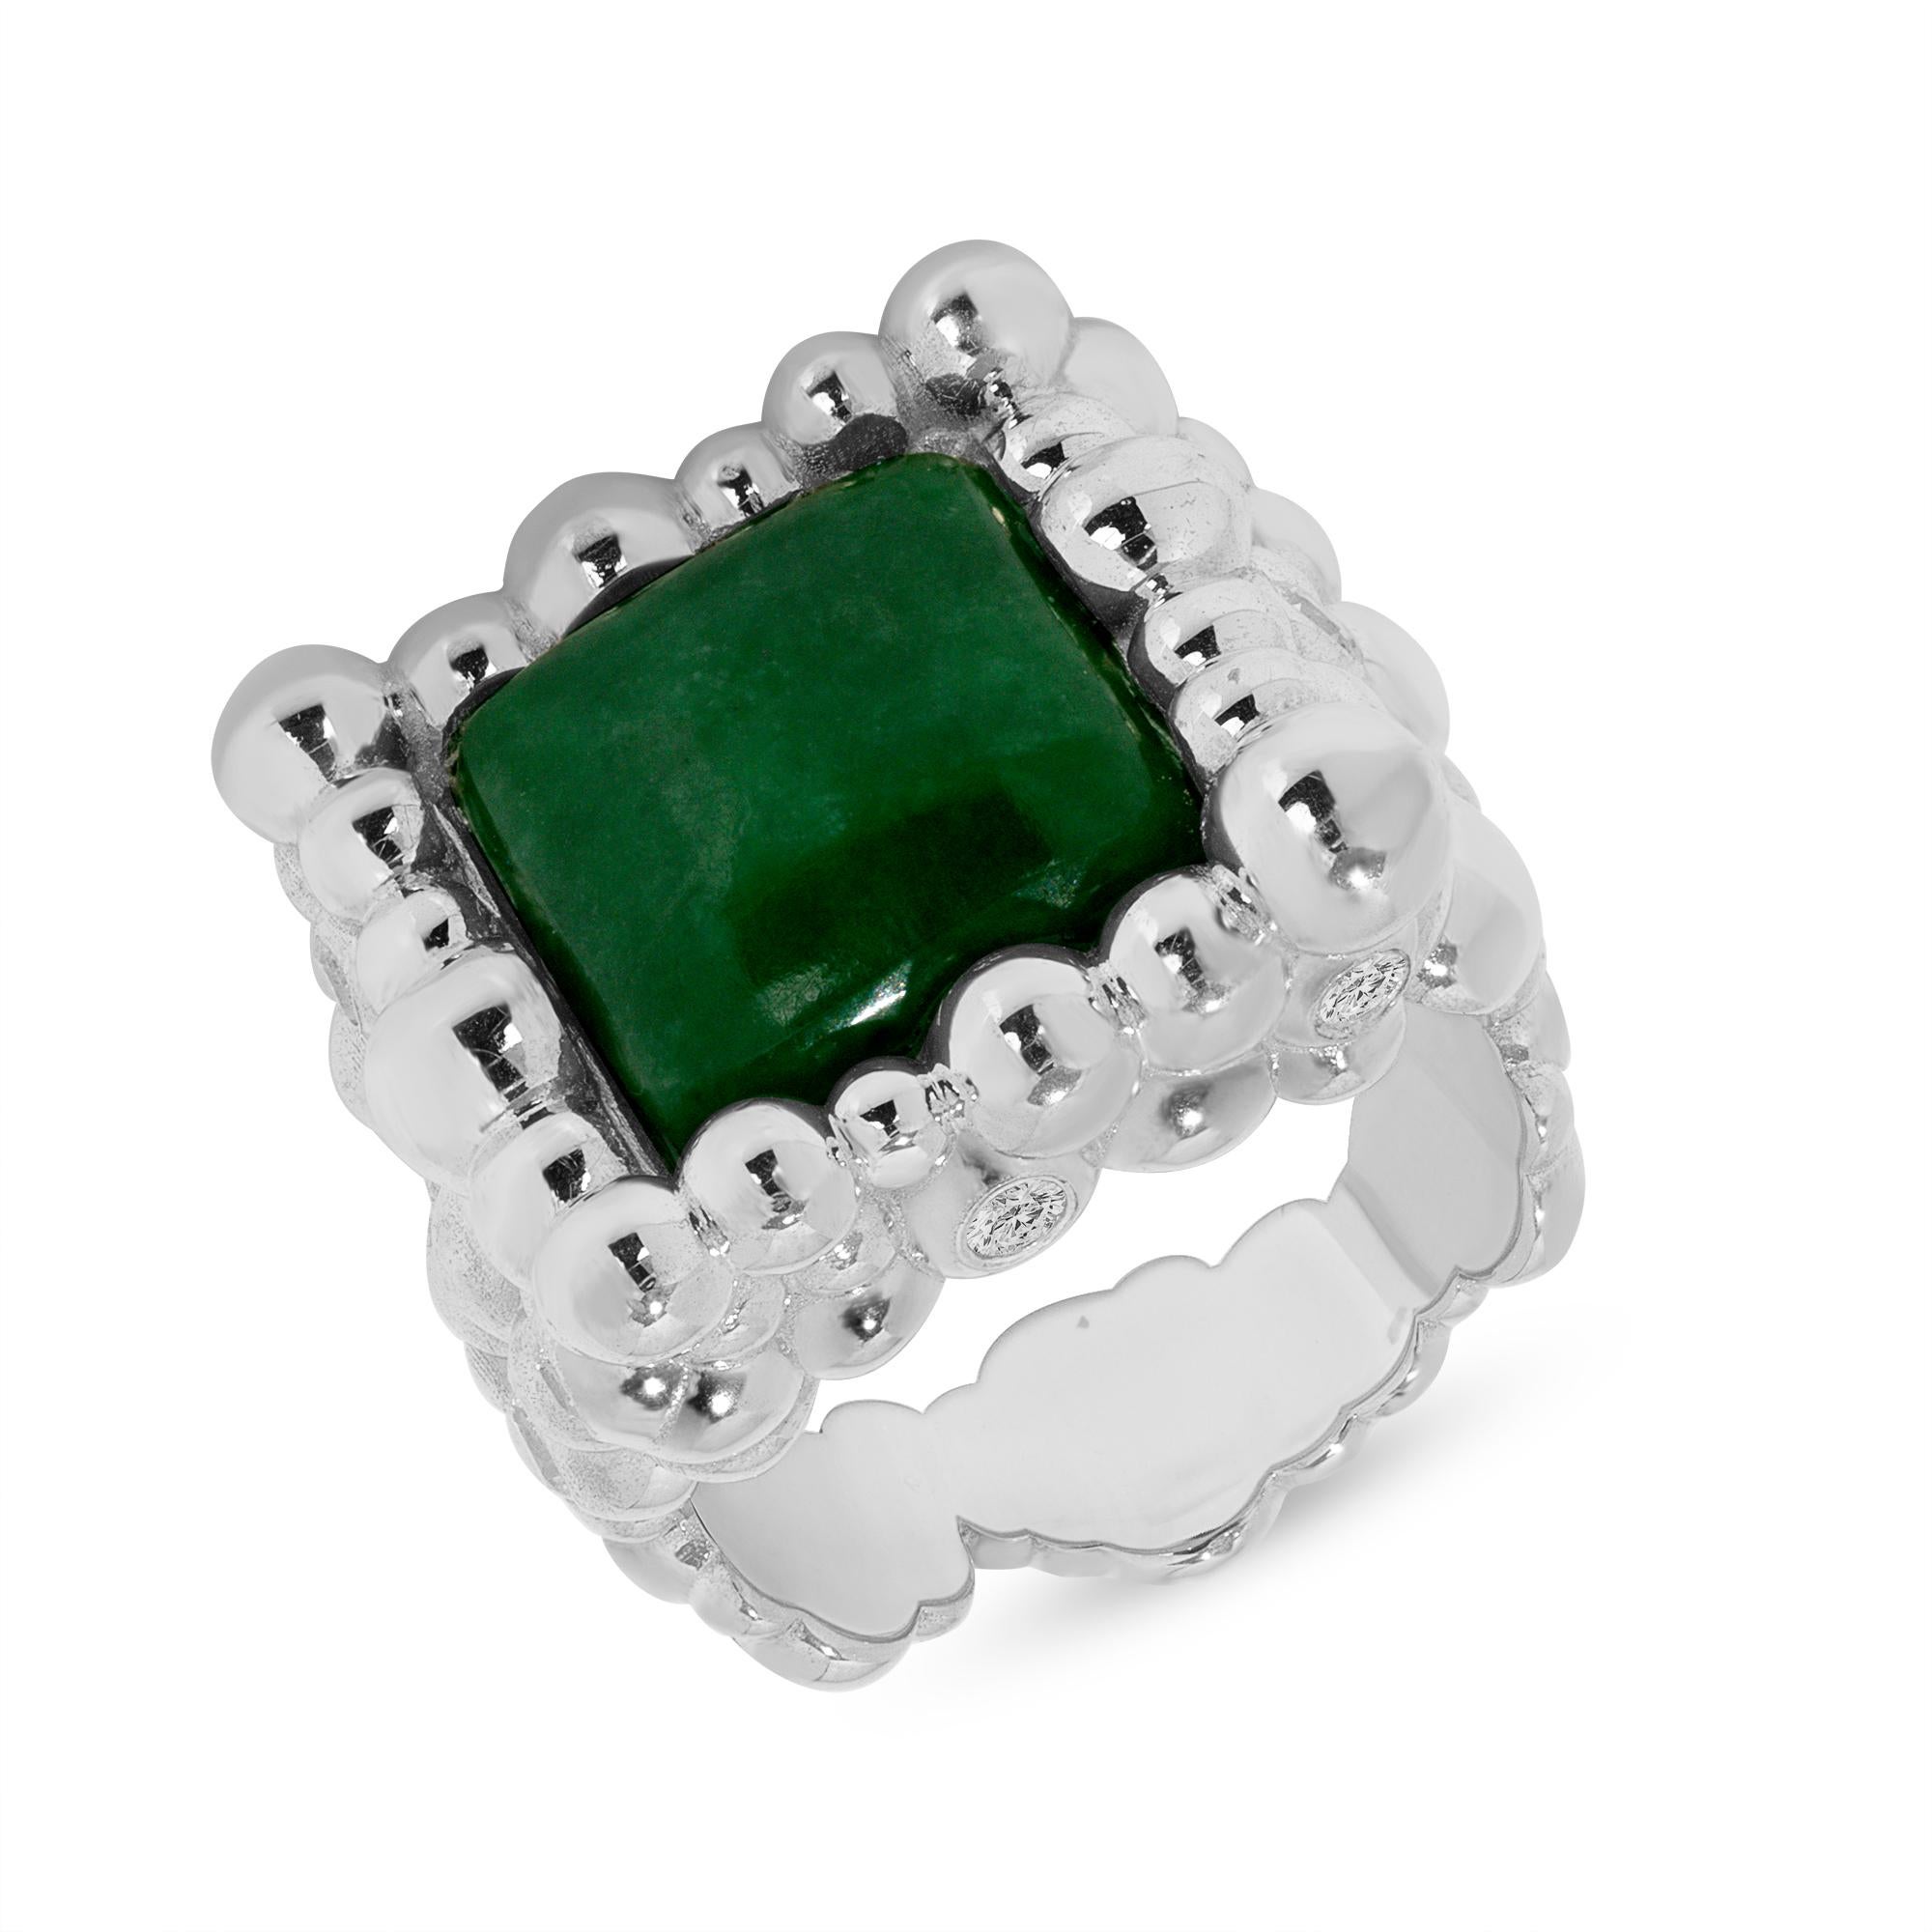 For Sale:  Unique 14k White Gold Ring with Diamonds and Jade 4